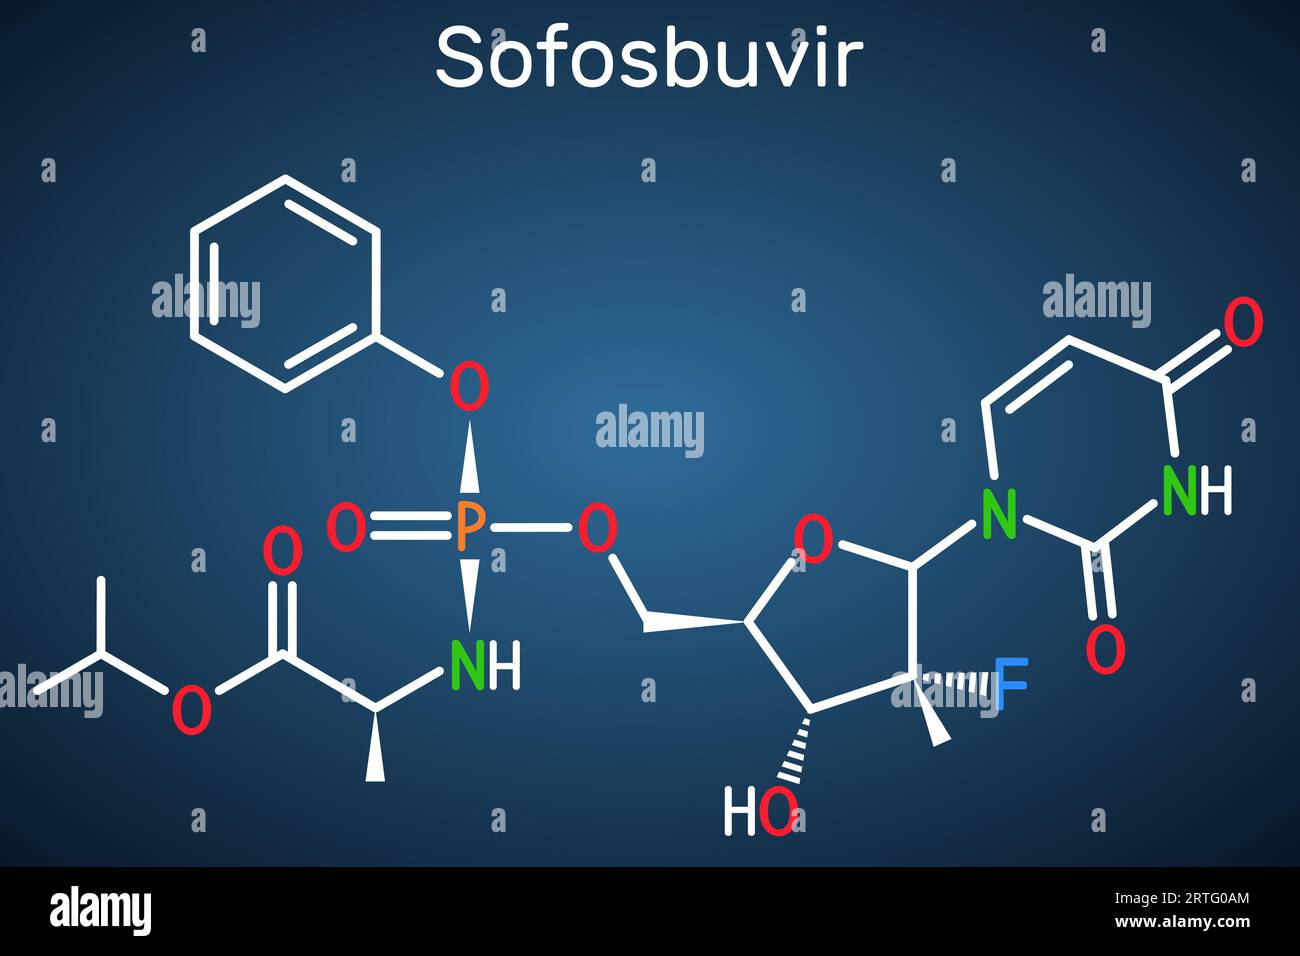 Sofosbuvir molecule. It is antiviral drug, used to treat  hepatitis C virus, HCV infections. Structural chemical formula on the dark blue background. Stock Vector